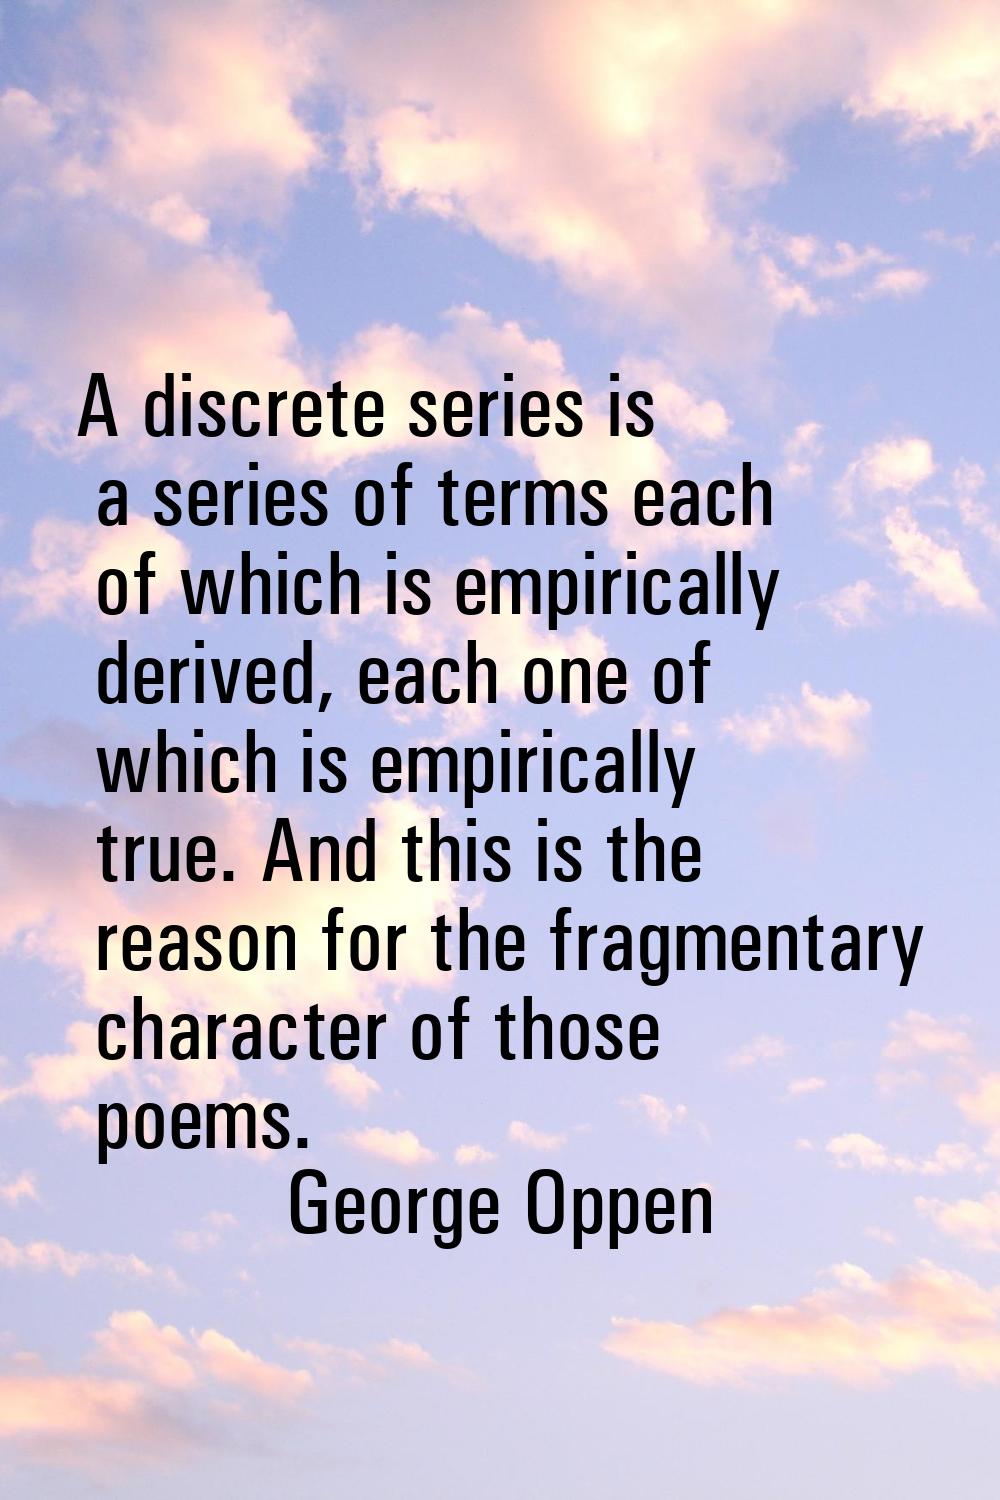 A discrete series is a series of terms each of which is empirically derived, each one of which is e